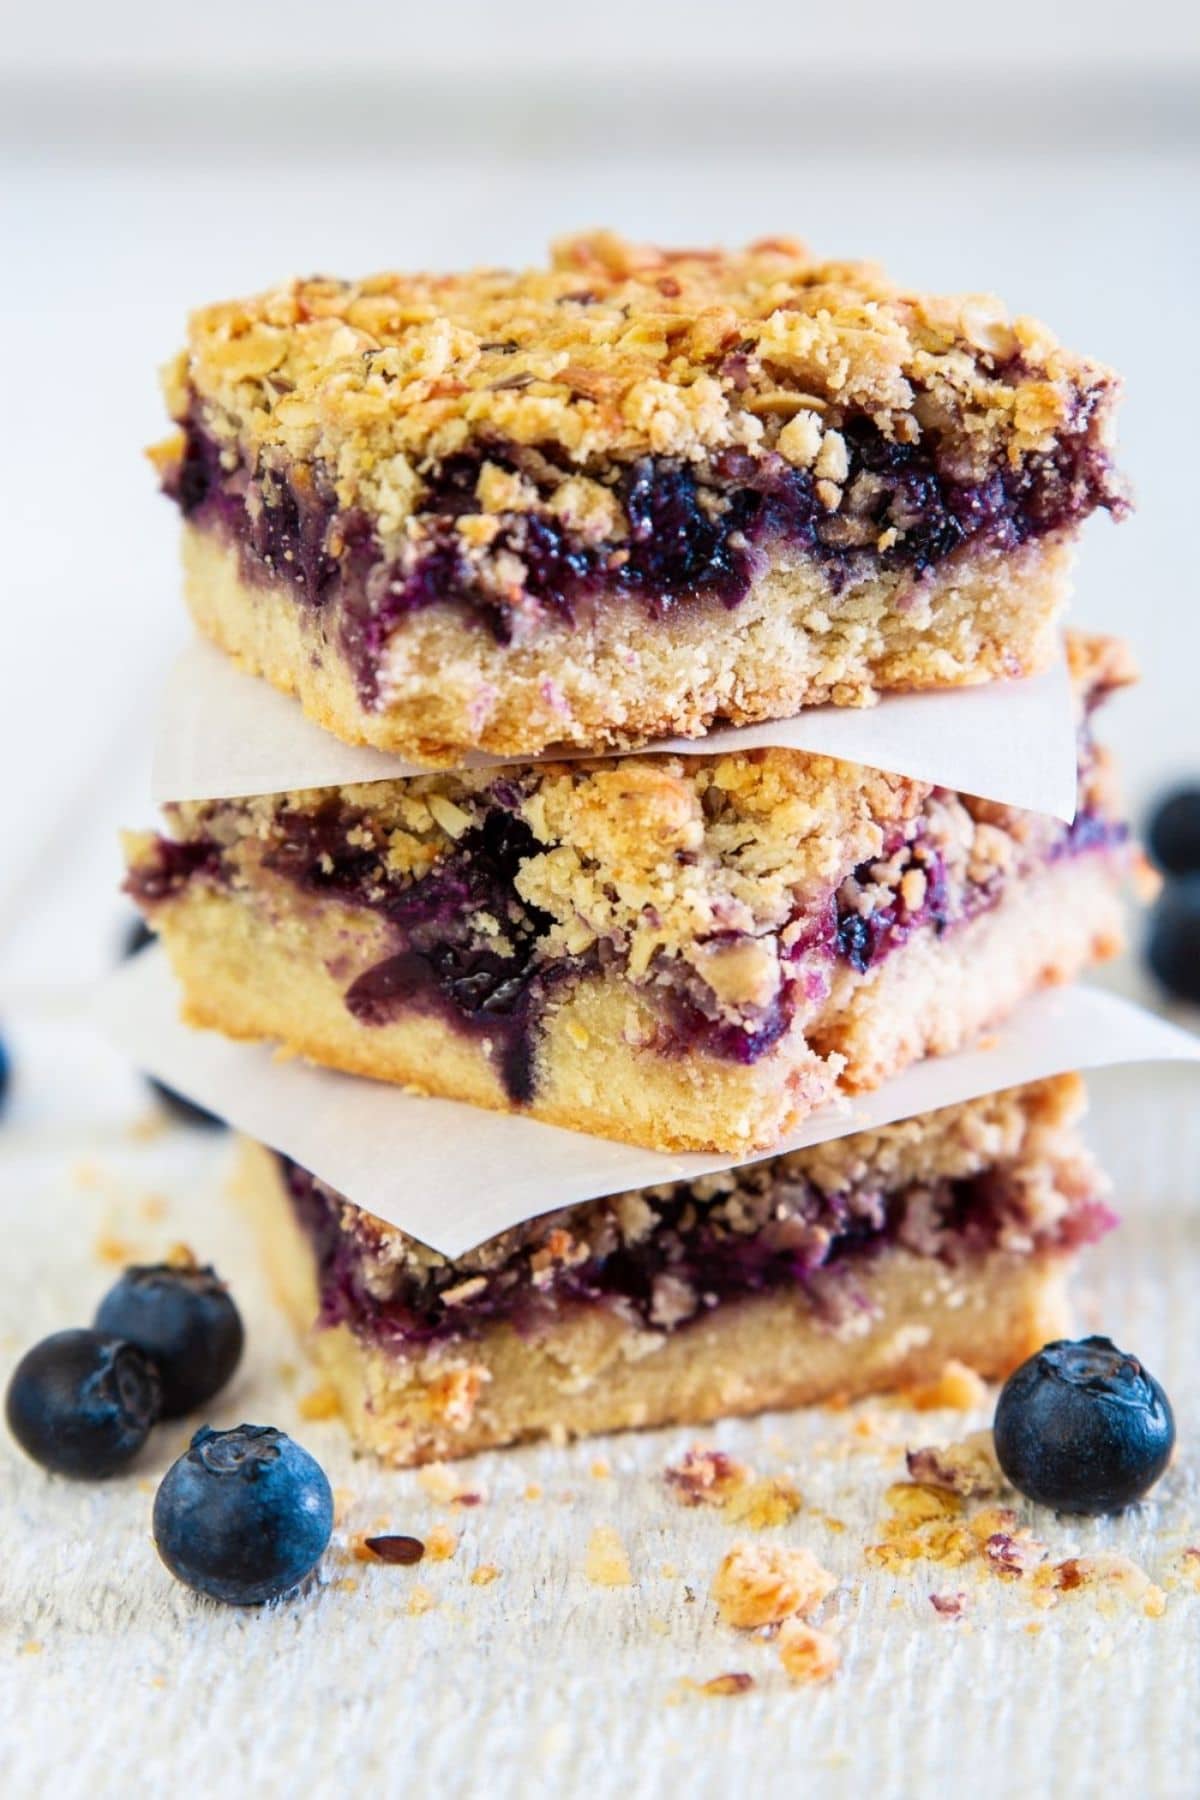 Blueberry crumb bars with waxed paper between slices